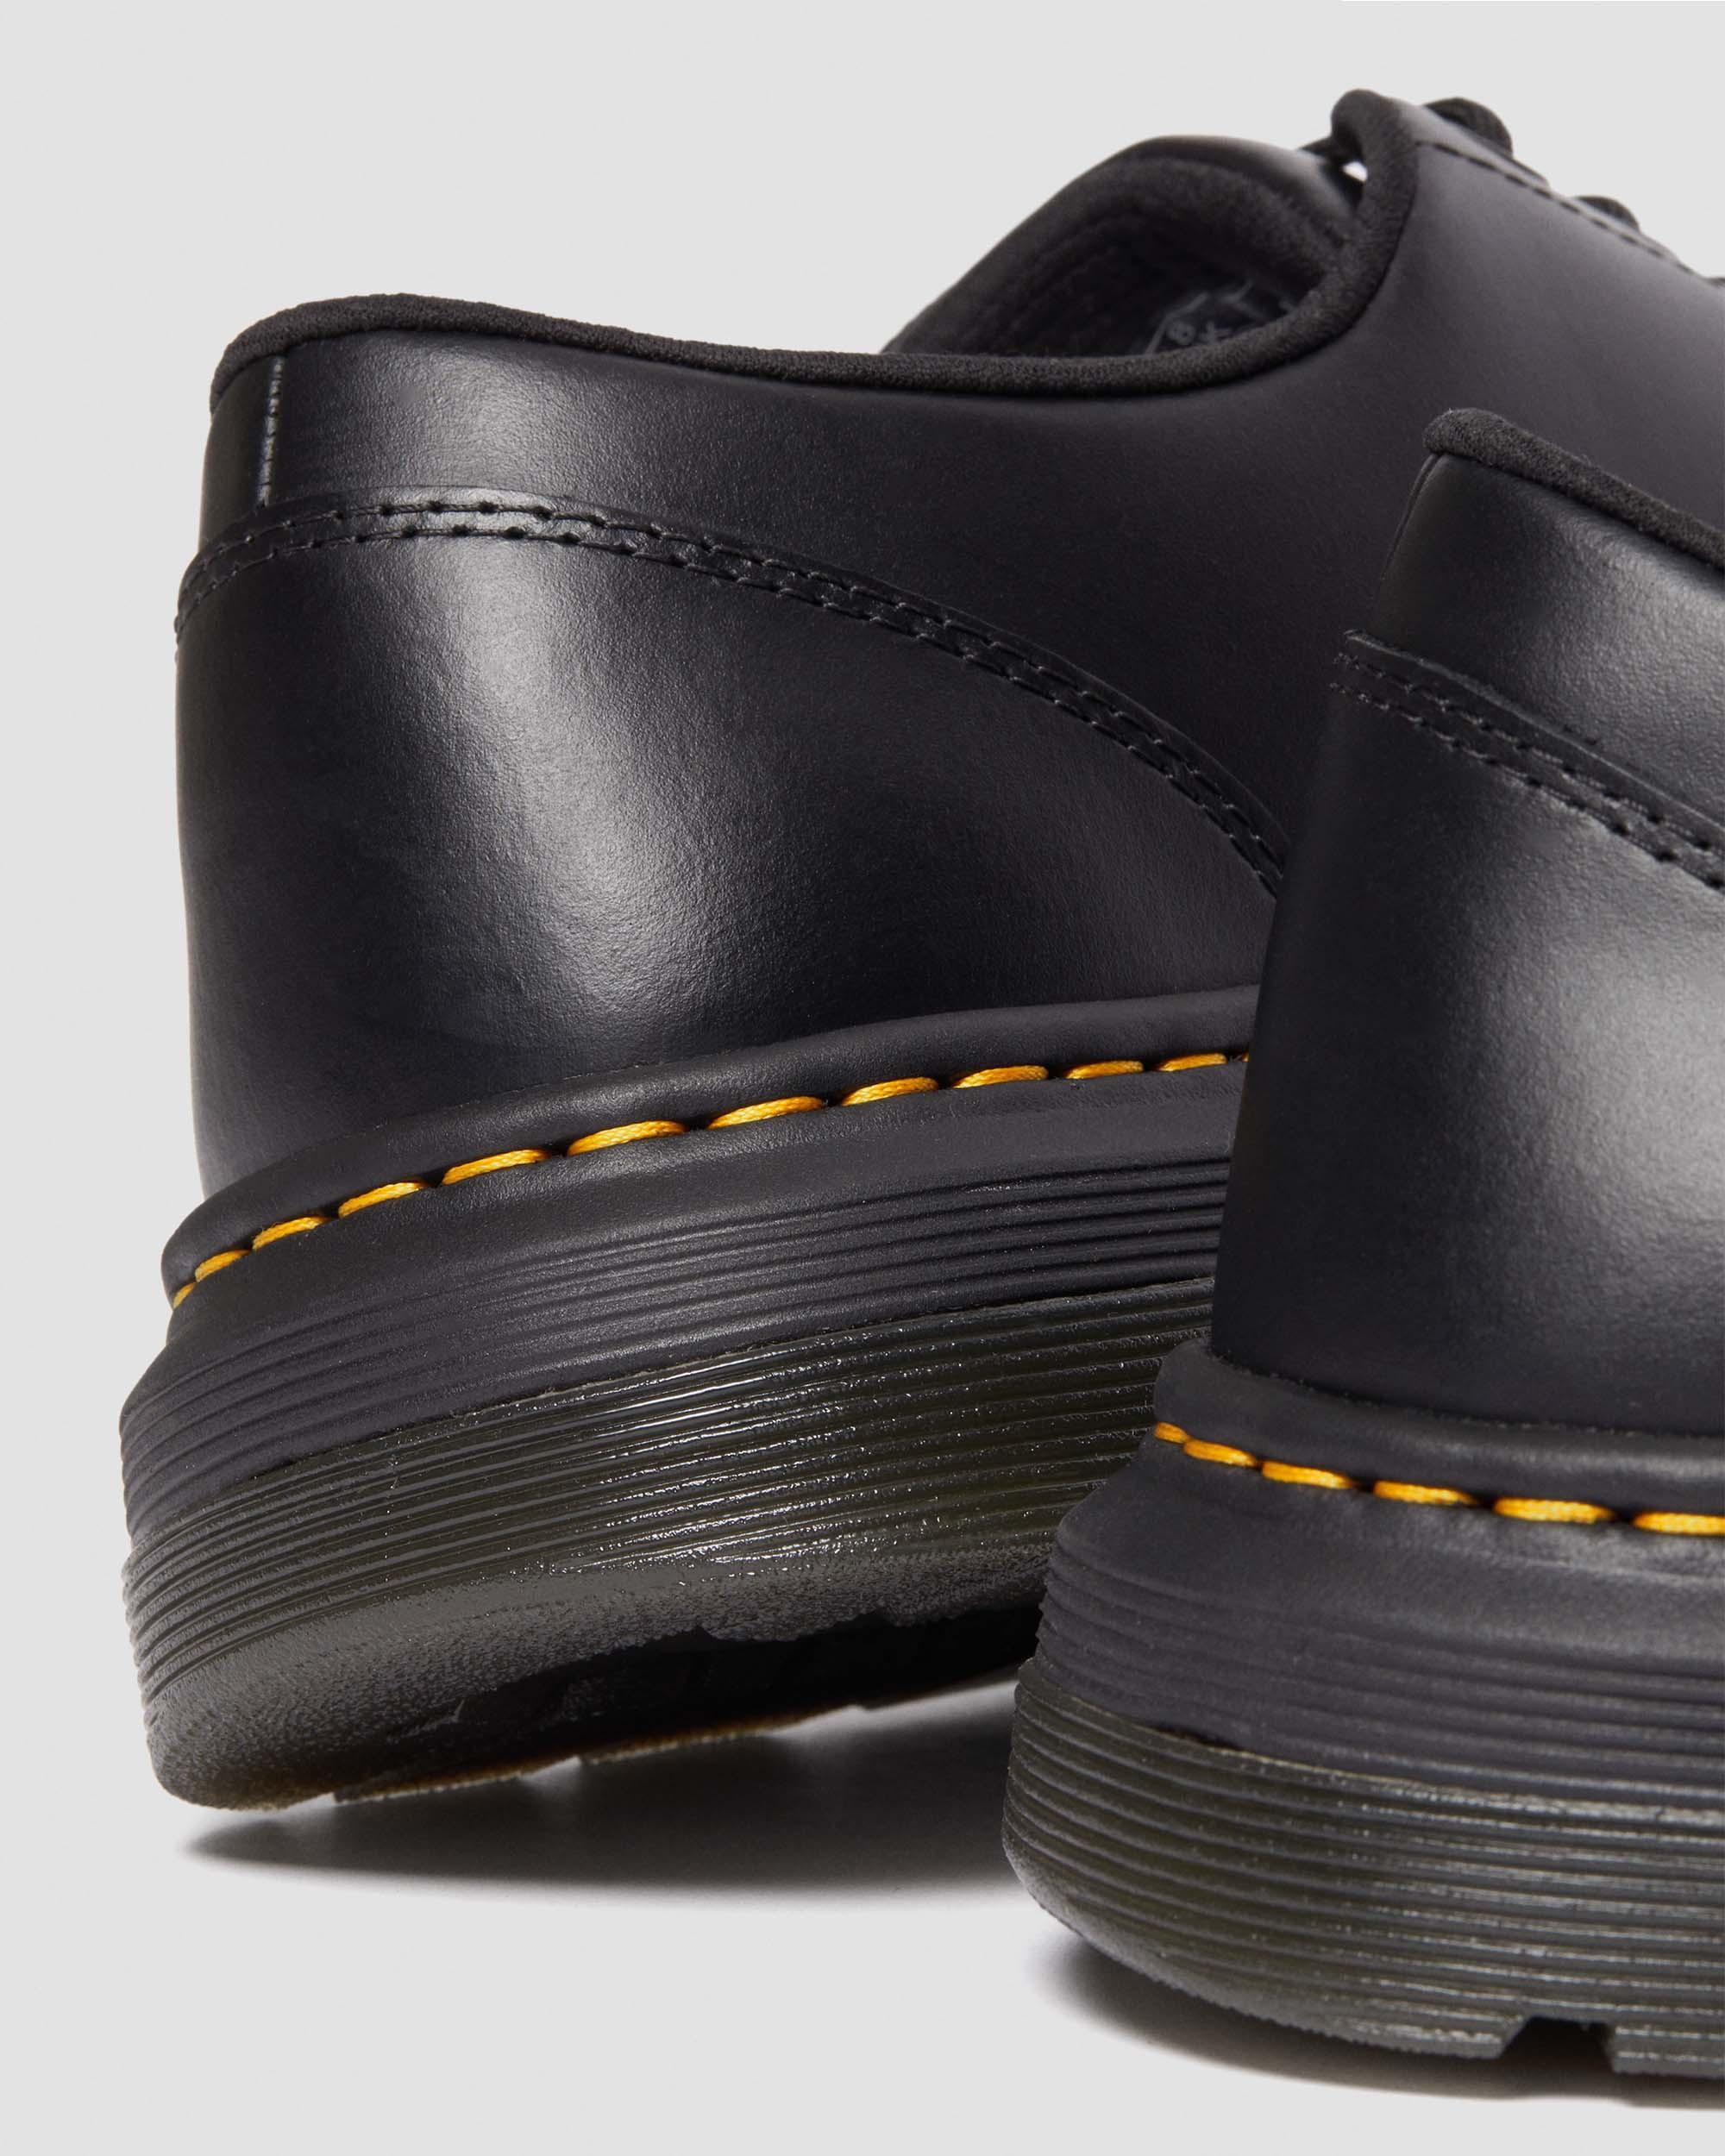 Crewson Lo Black Leather Shoes in BLACK